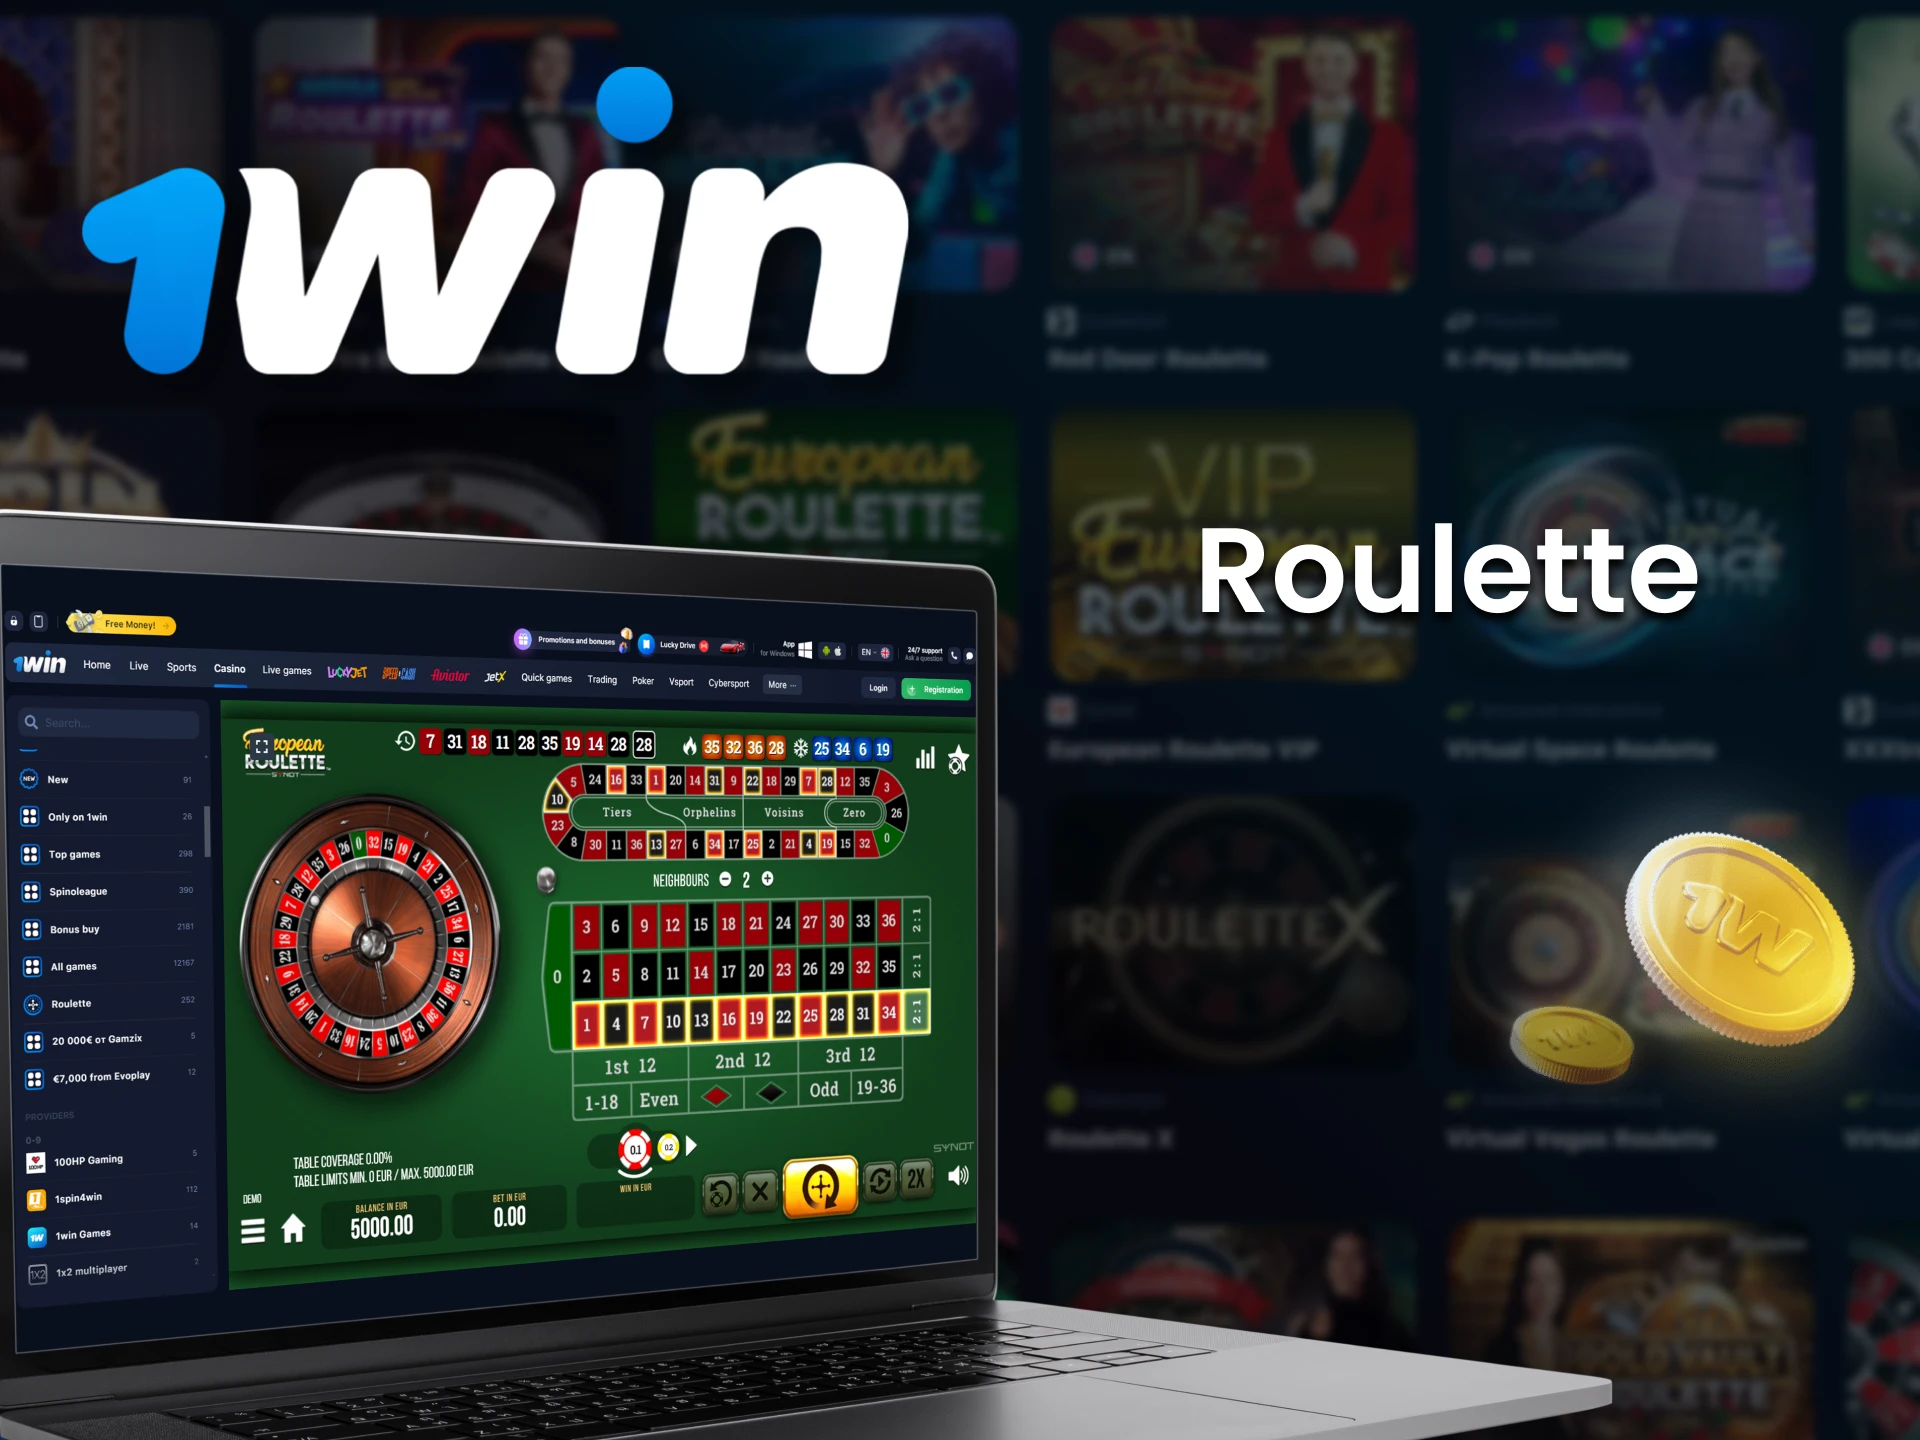 For casino games at 1win, choose Roulette.